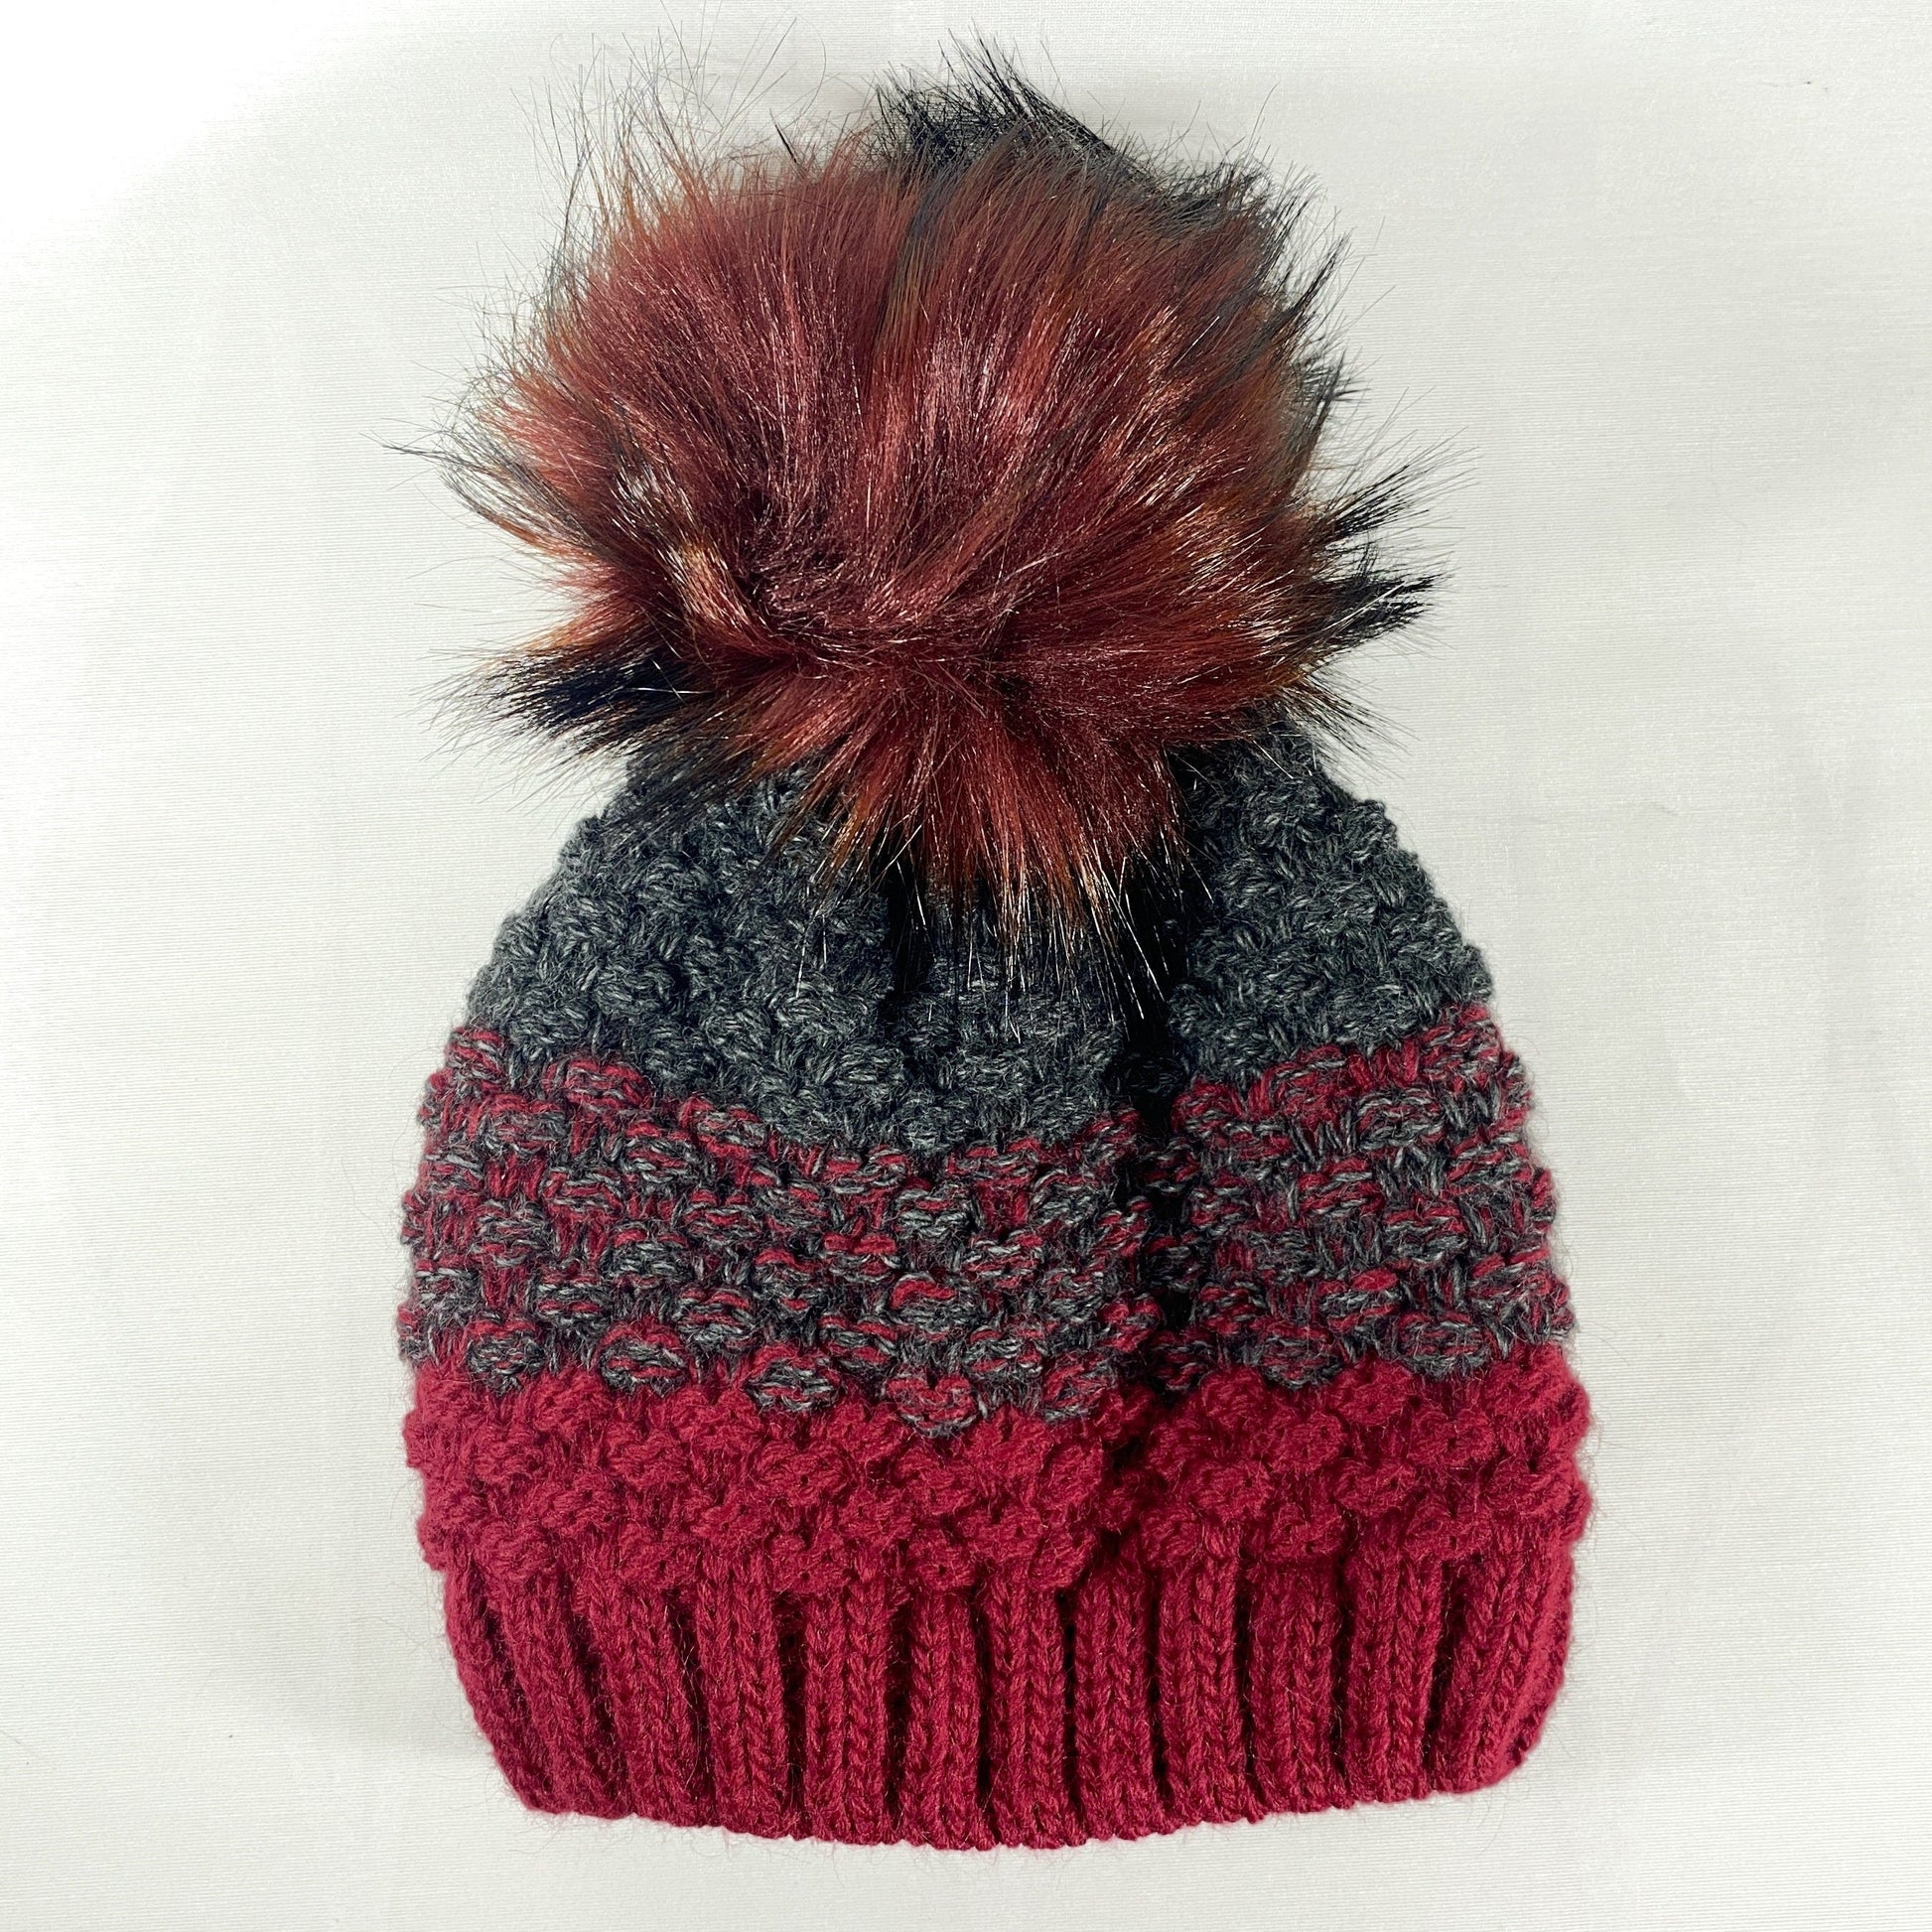 Wine Red Winter Beanie With Pompom - Made From Italian Wool, Acrylic Yarn, and Faux Fur